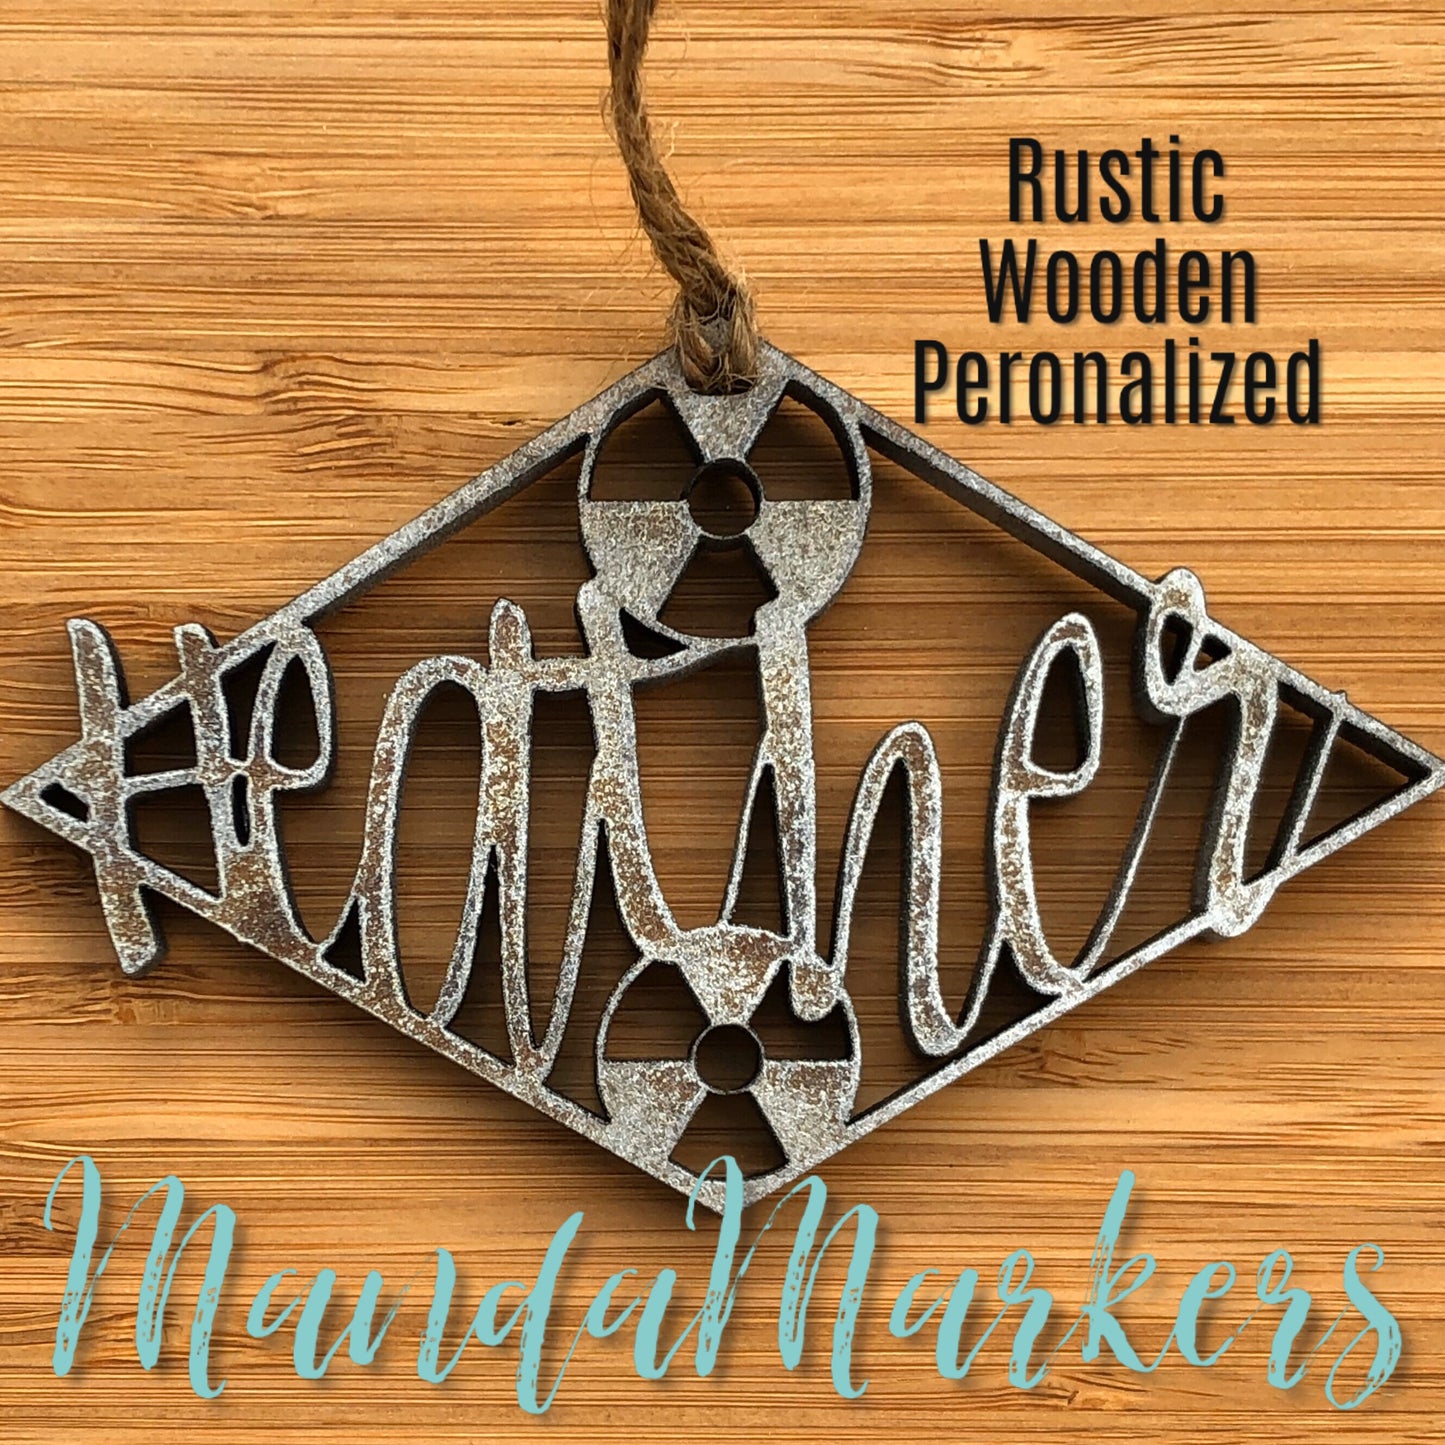 Radiation Symbol Wooden Ornament Personalized with Name Rustic Metallic